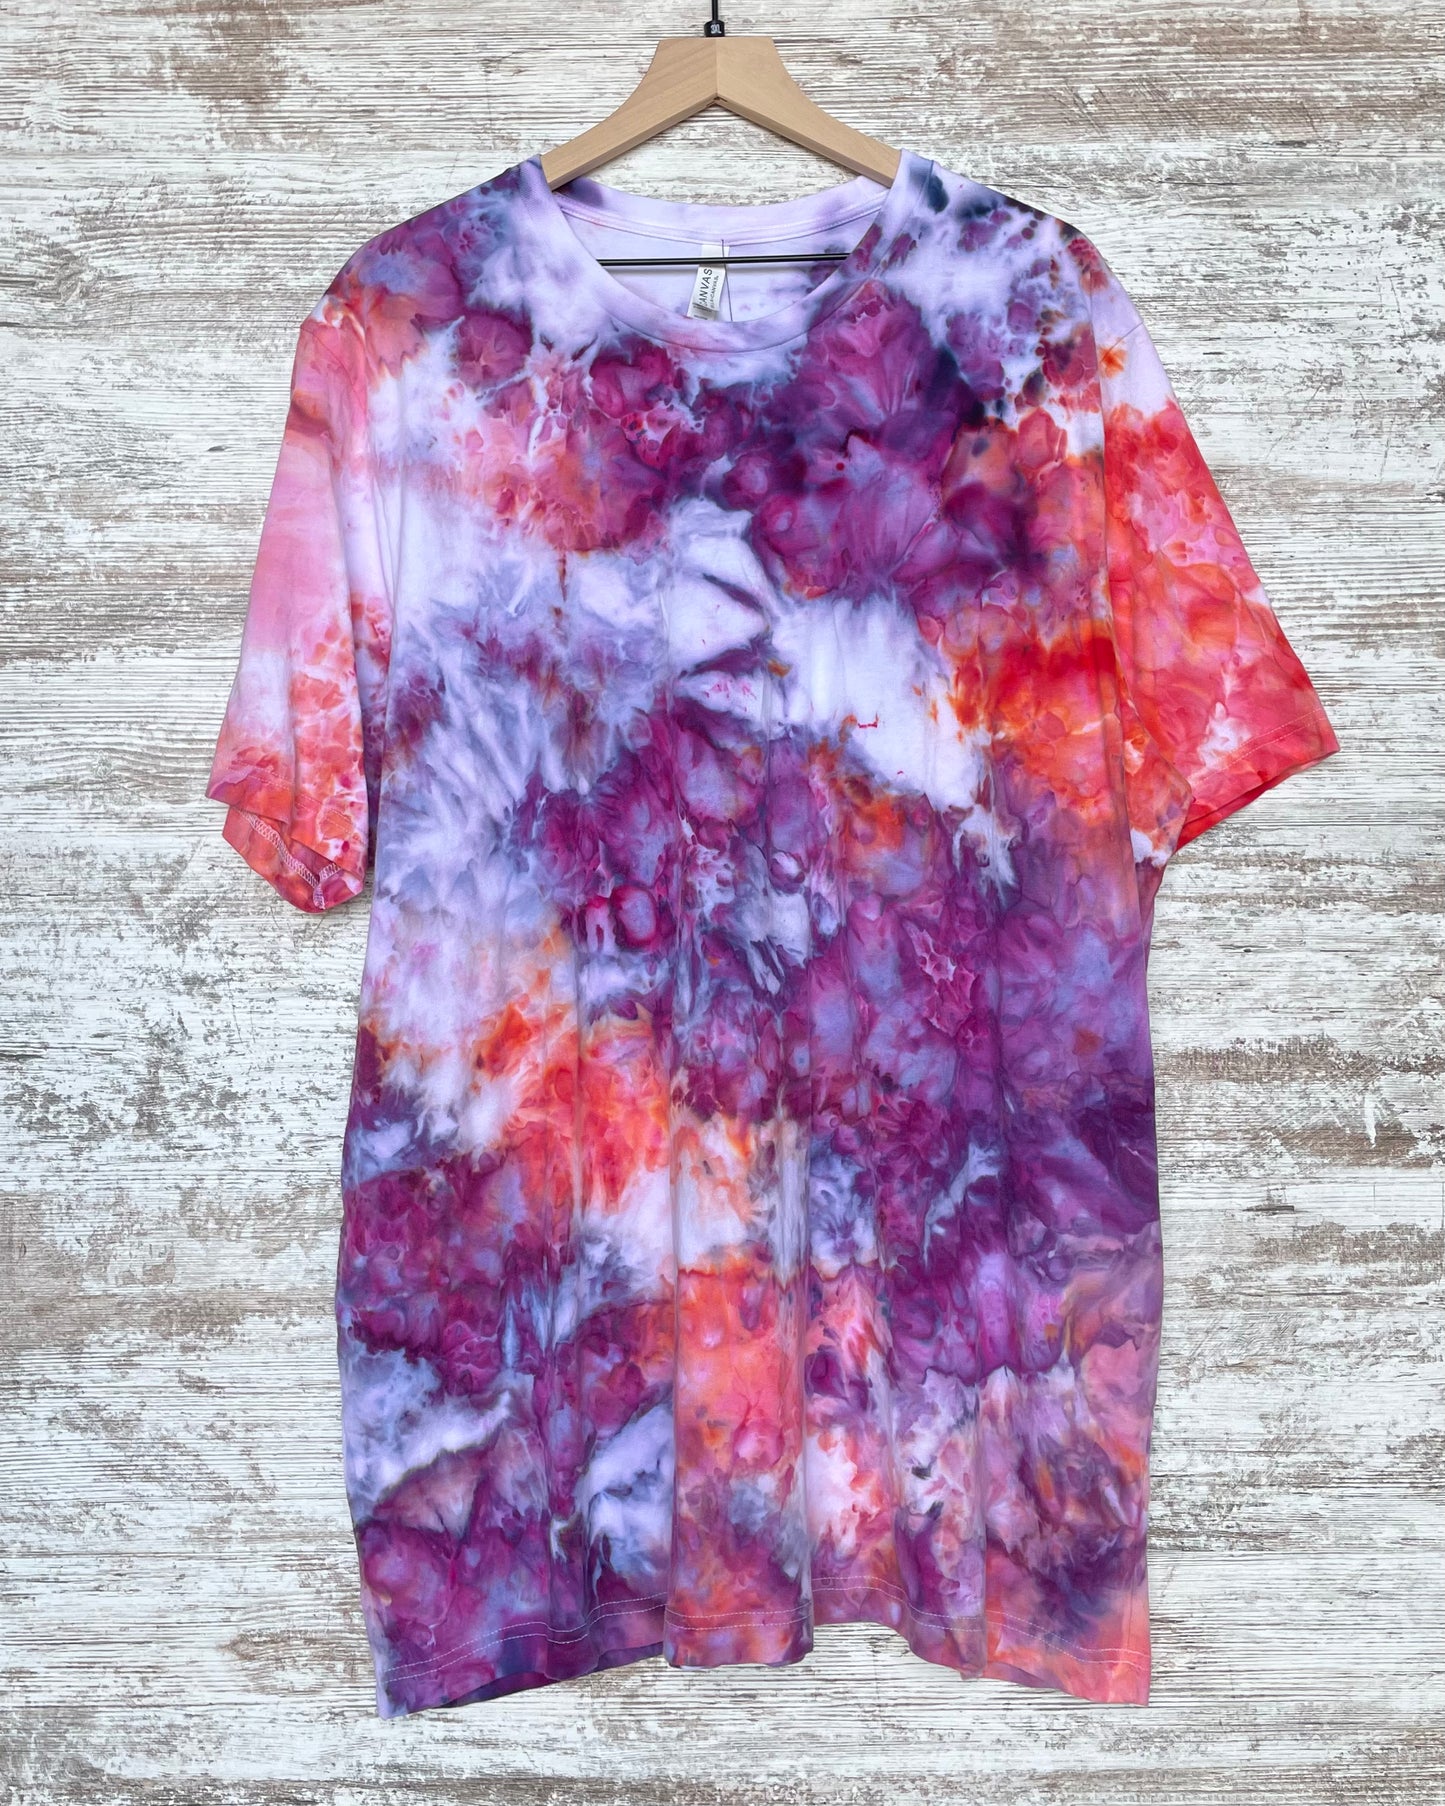 Coral & Plum Ice-Dyed Adult Unisex T-shirt